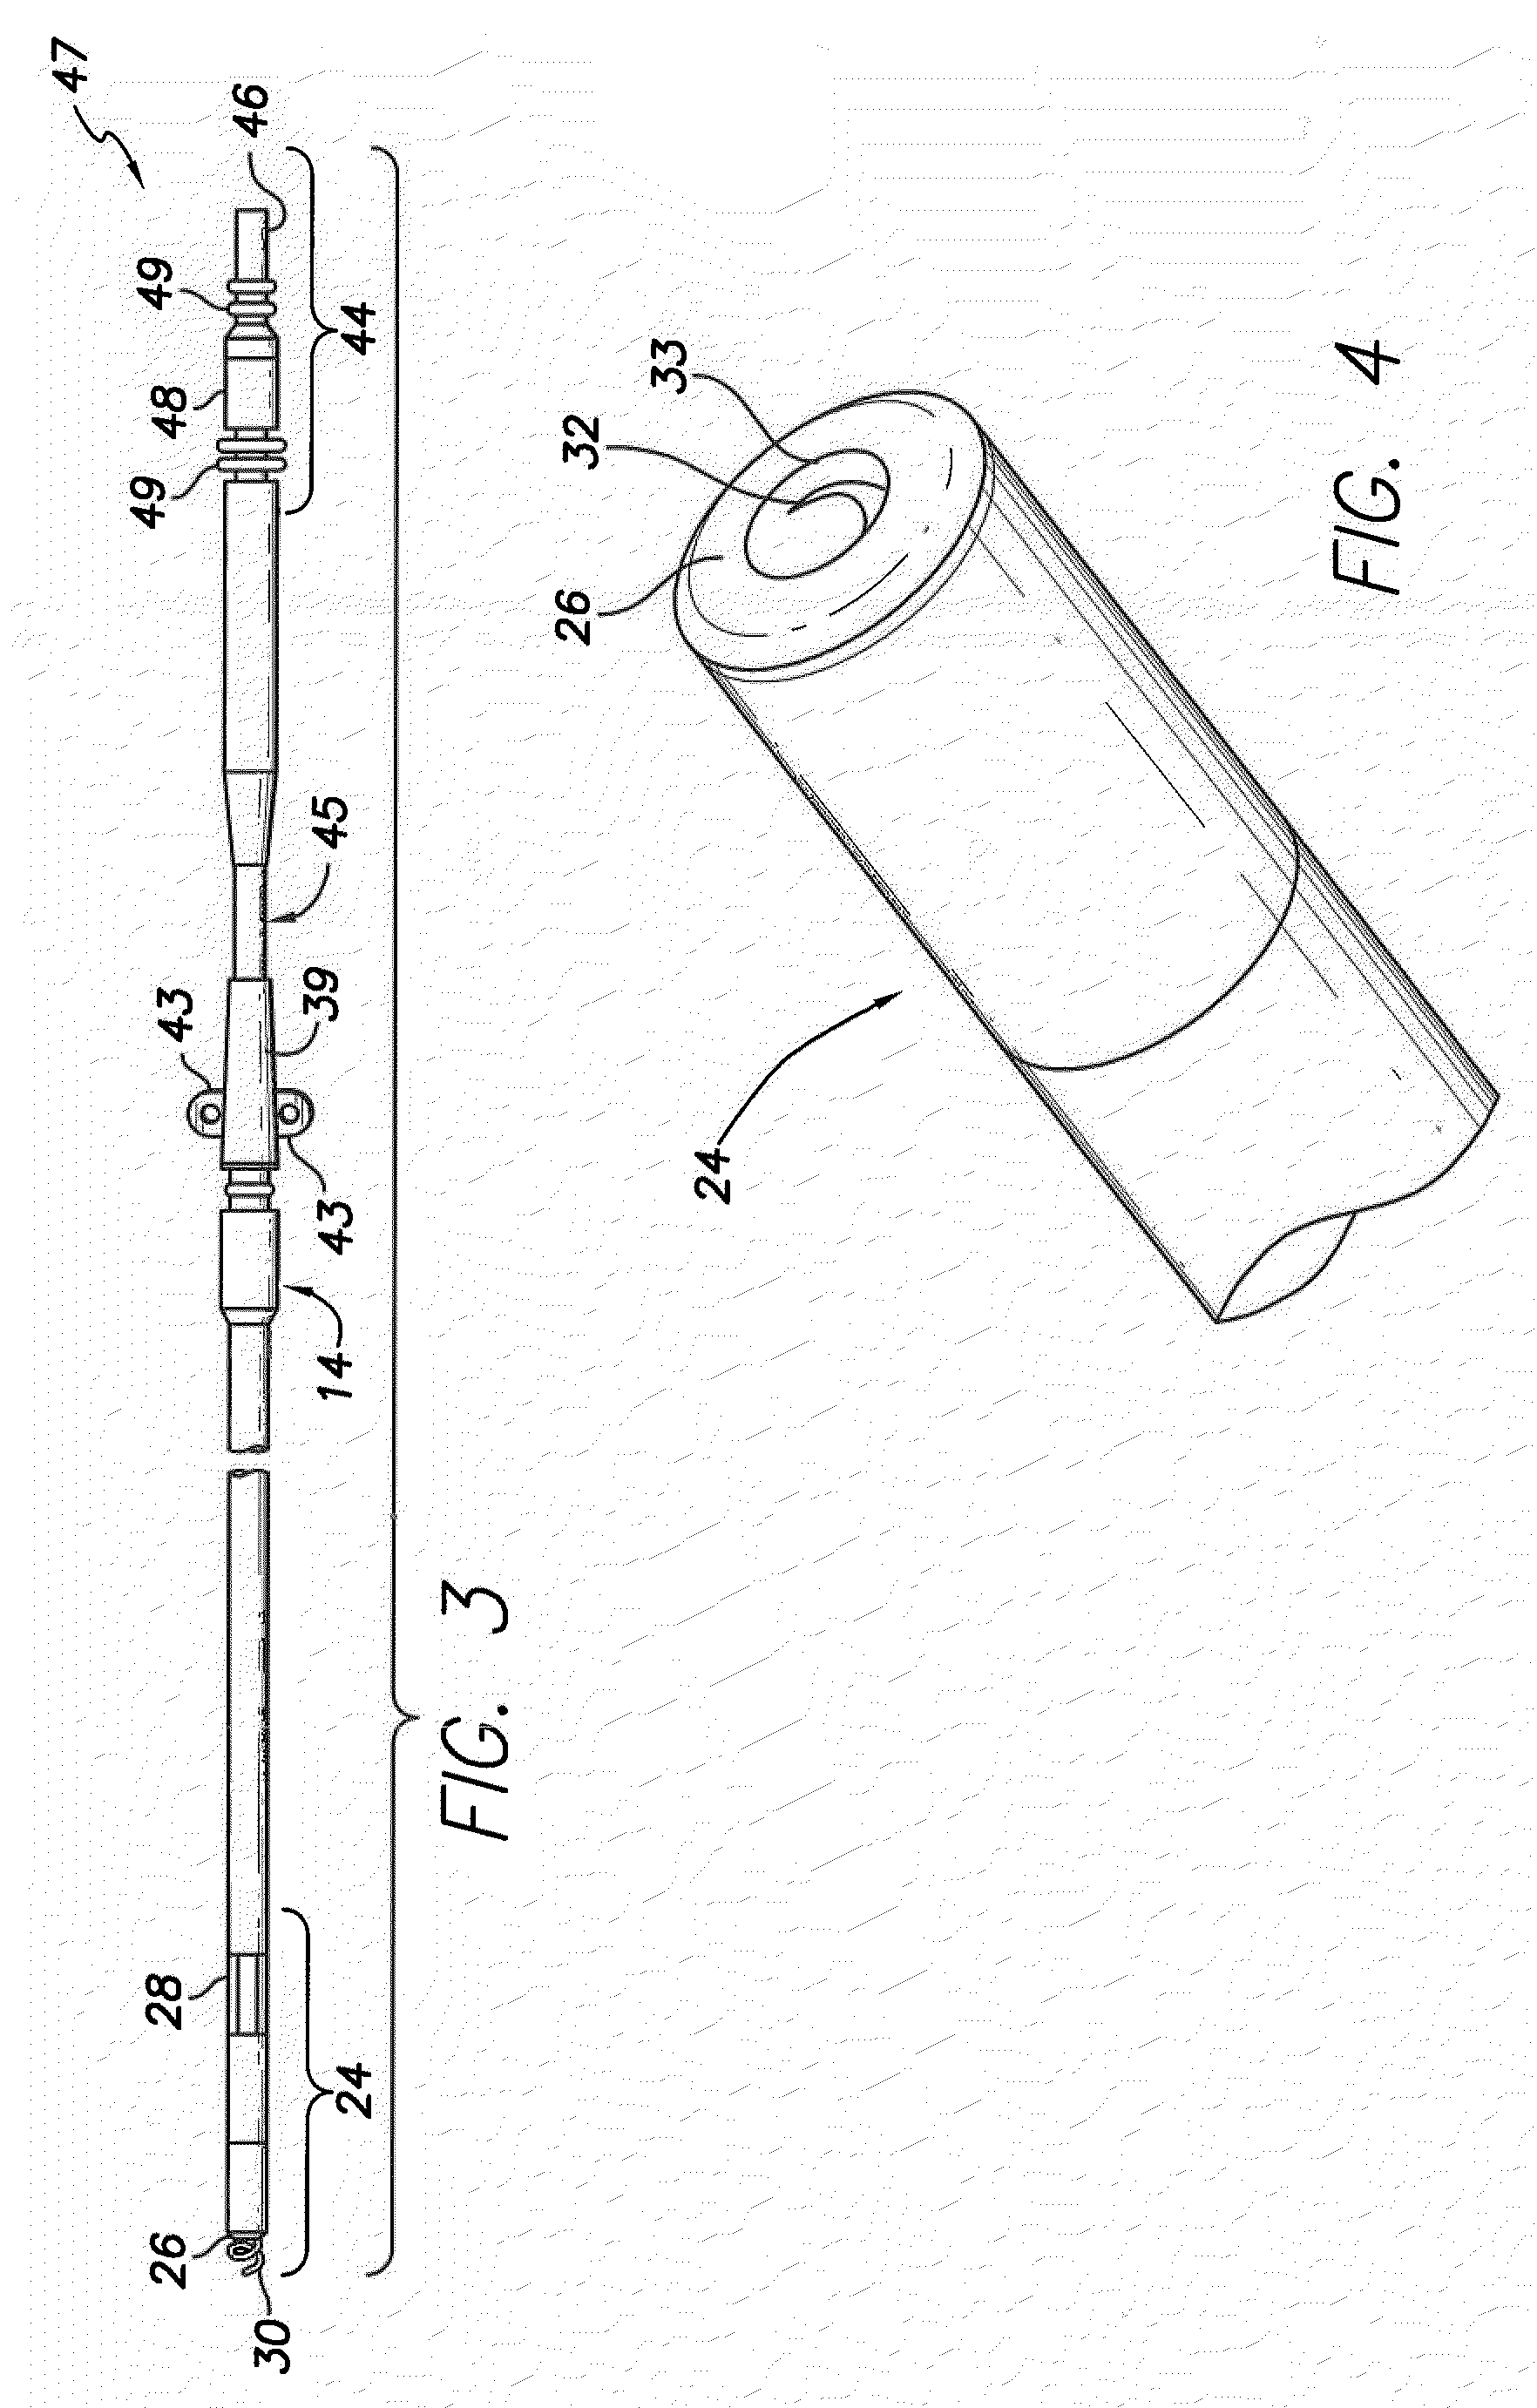 Device and method for the implantation of active fixation medical leads